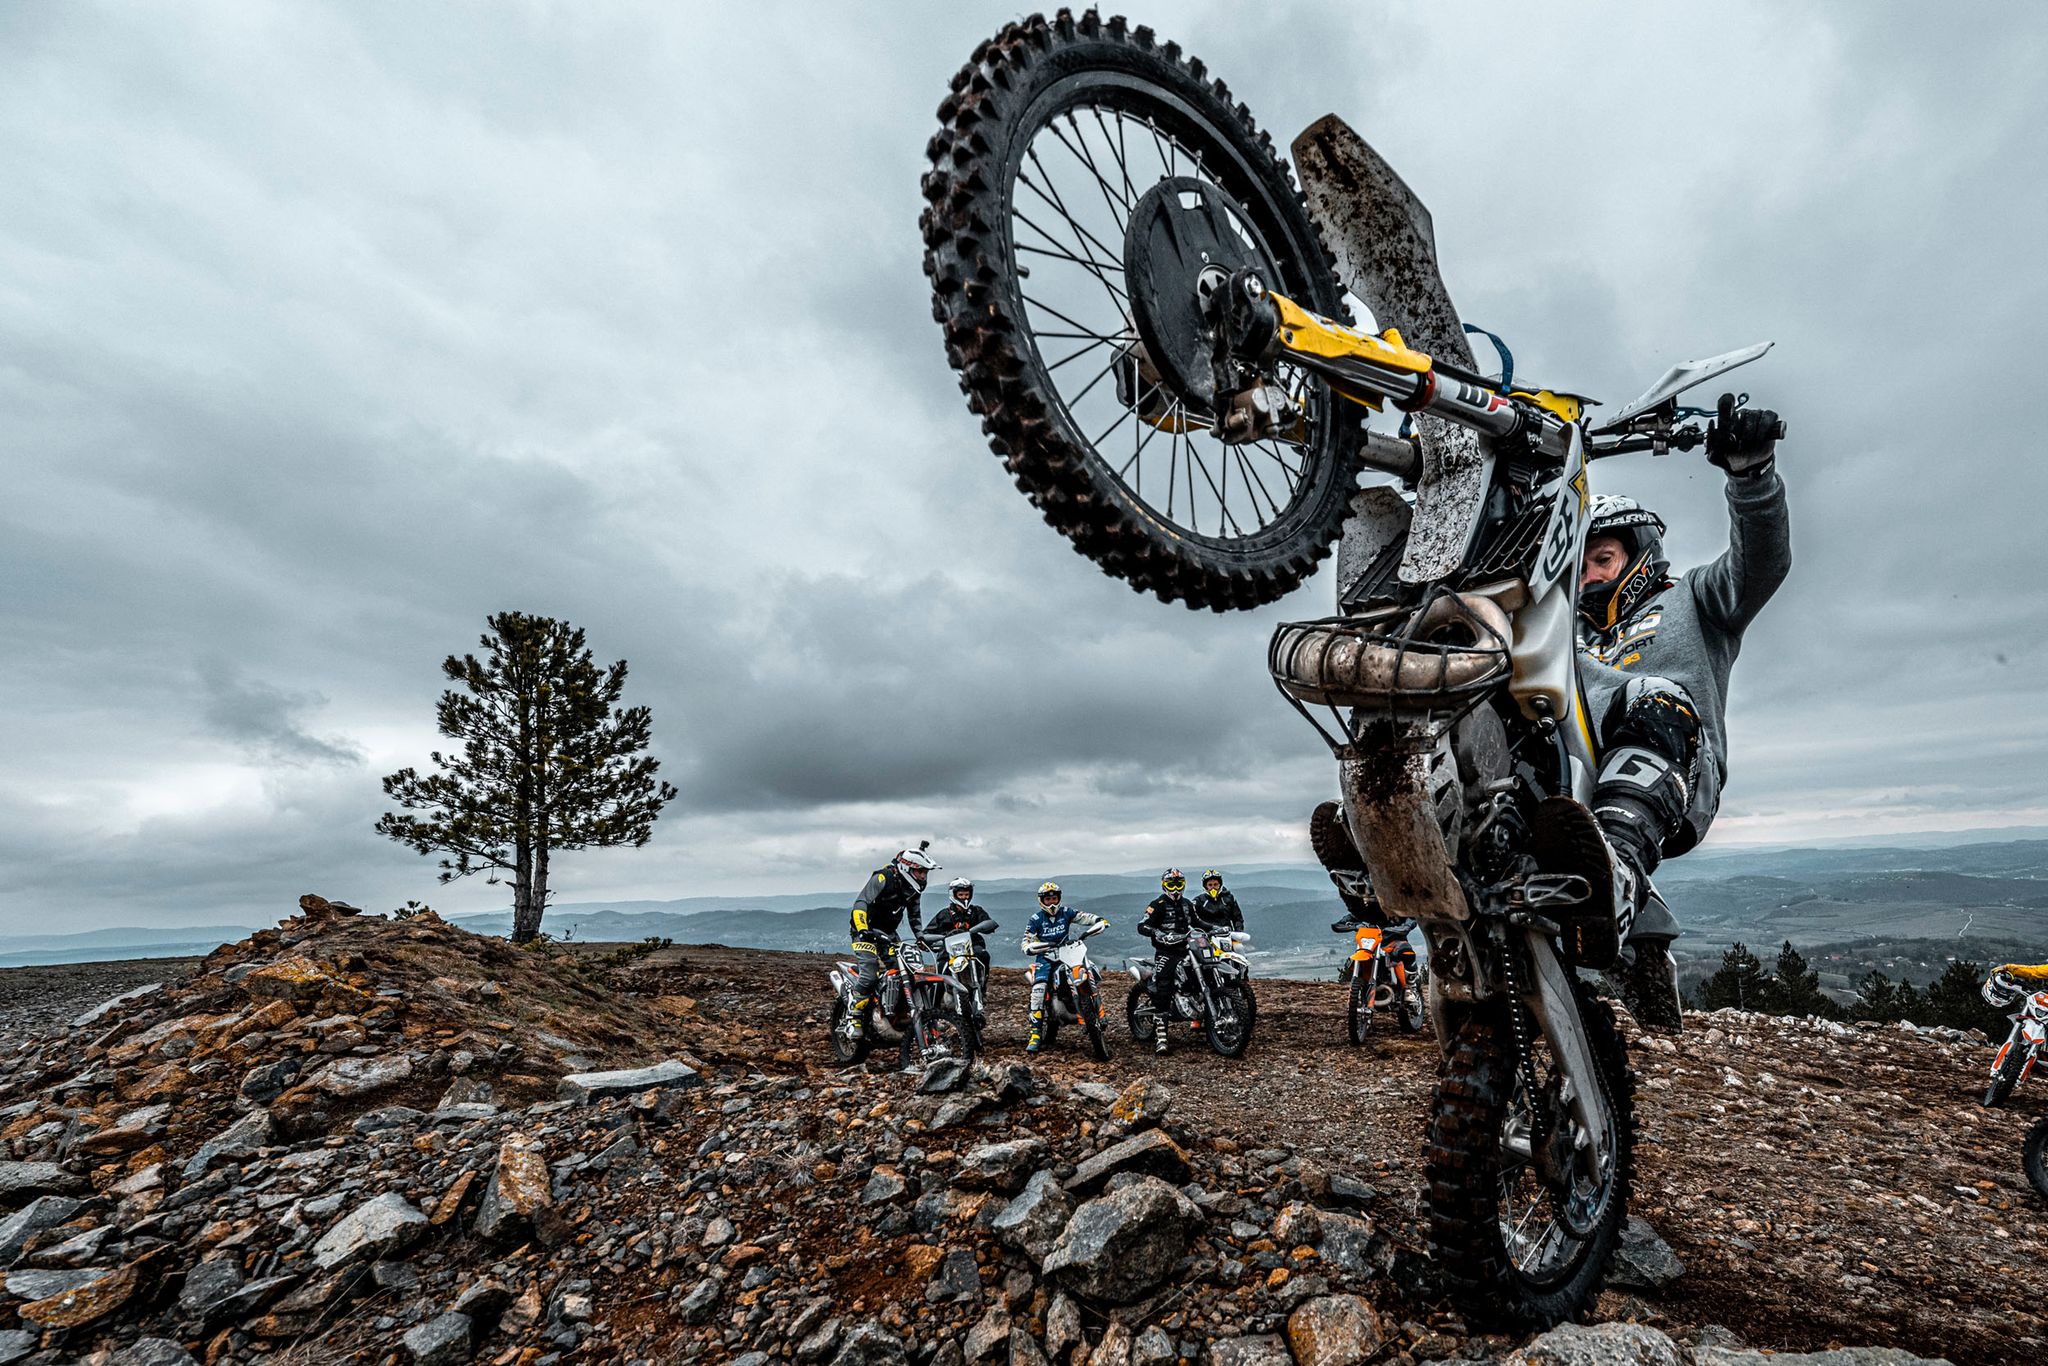 THE BEST ACTION FROM EXTREME ENDURO MASTER CLASS WITH GRAHAM JARVIS